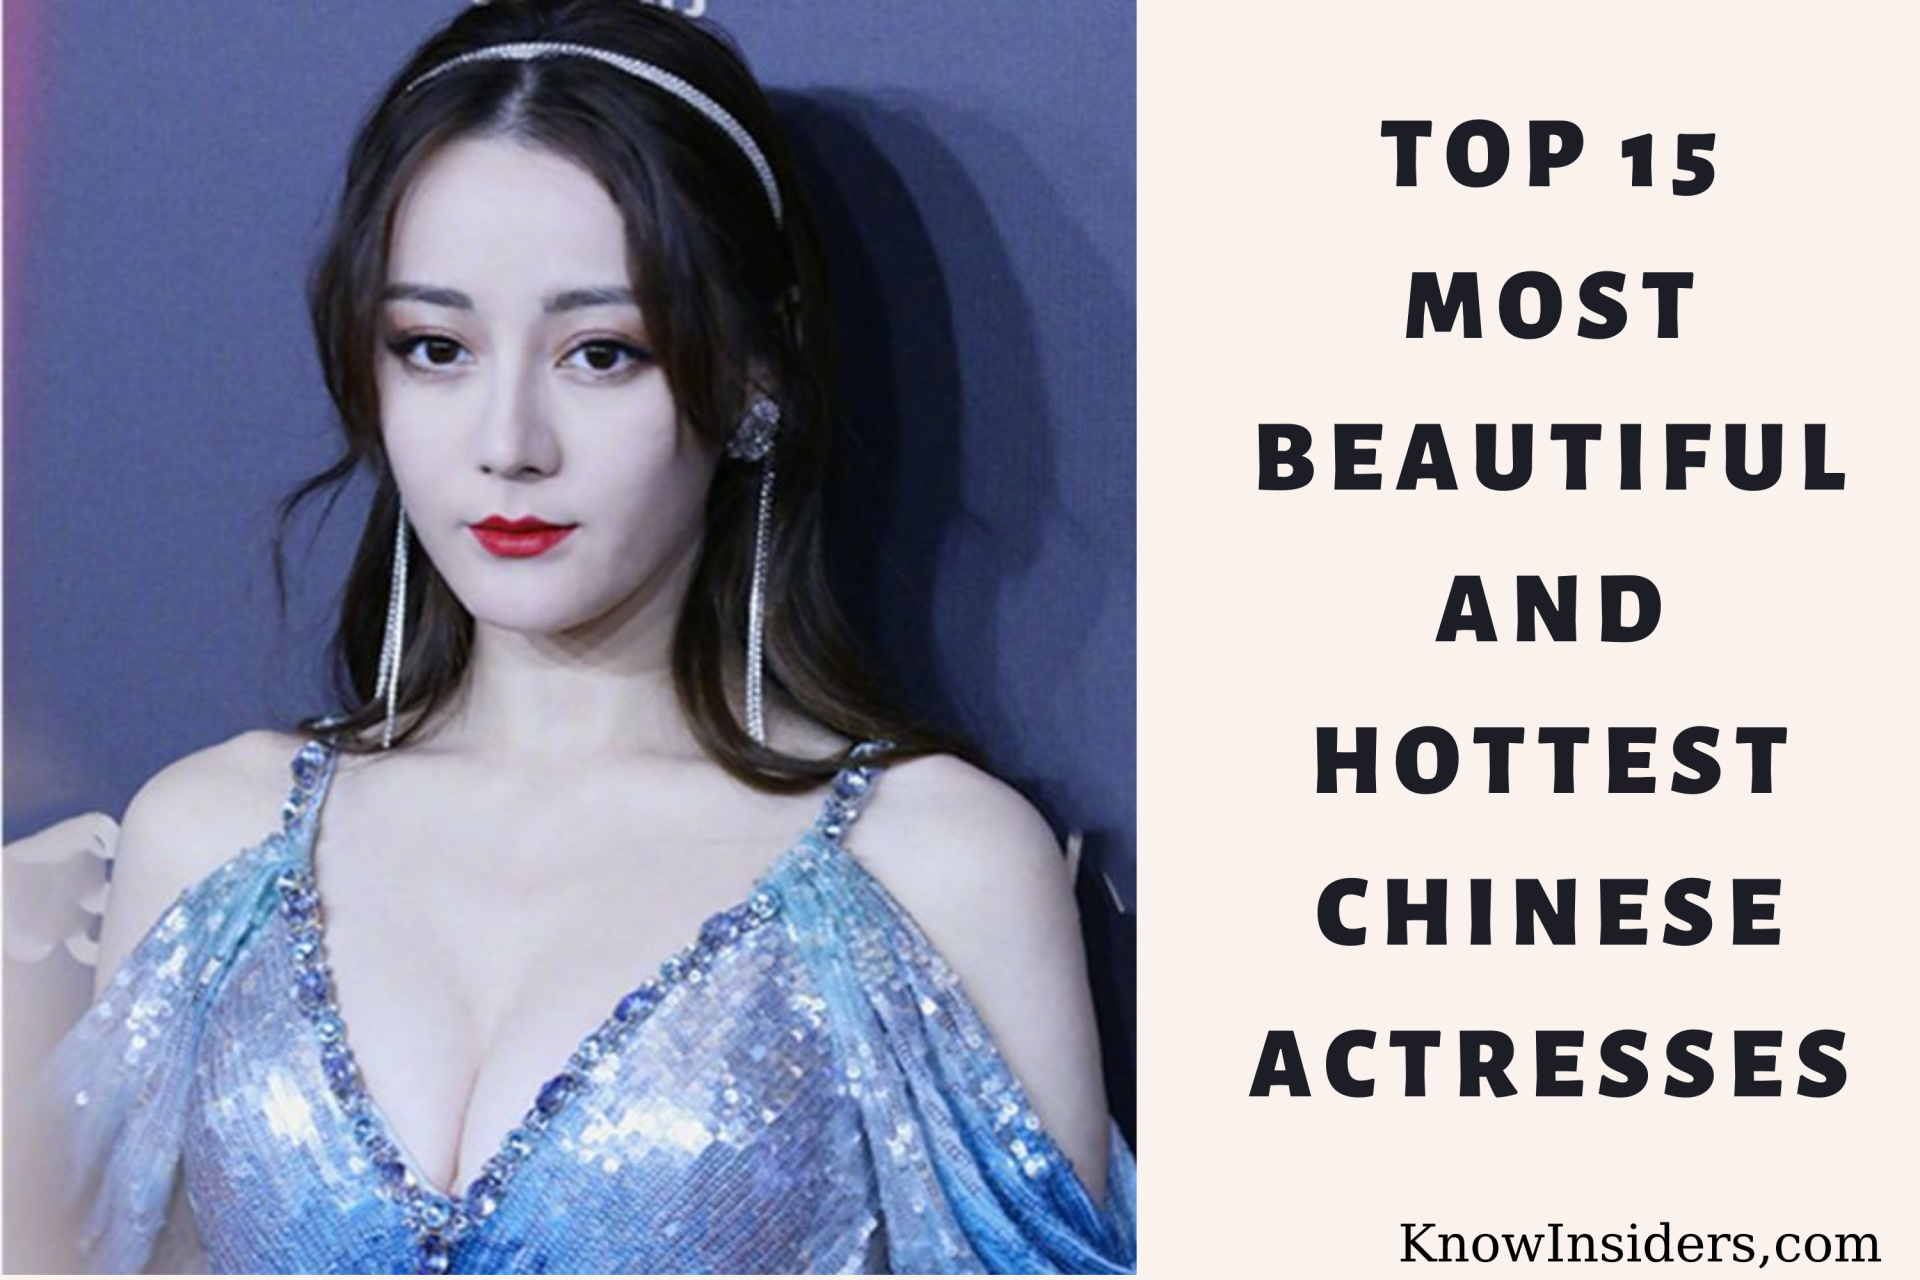 Top 15 Most Beatuful and Hottest Chinese Actresses